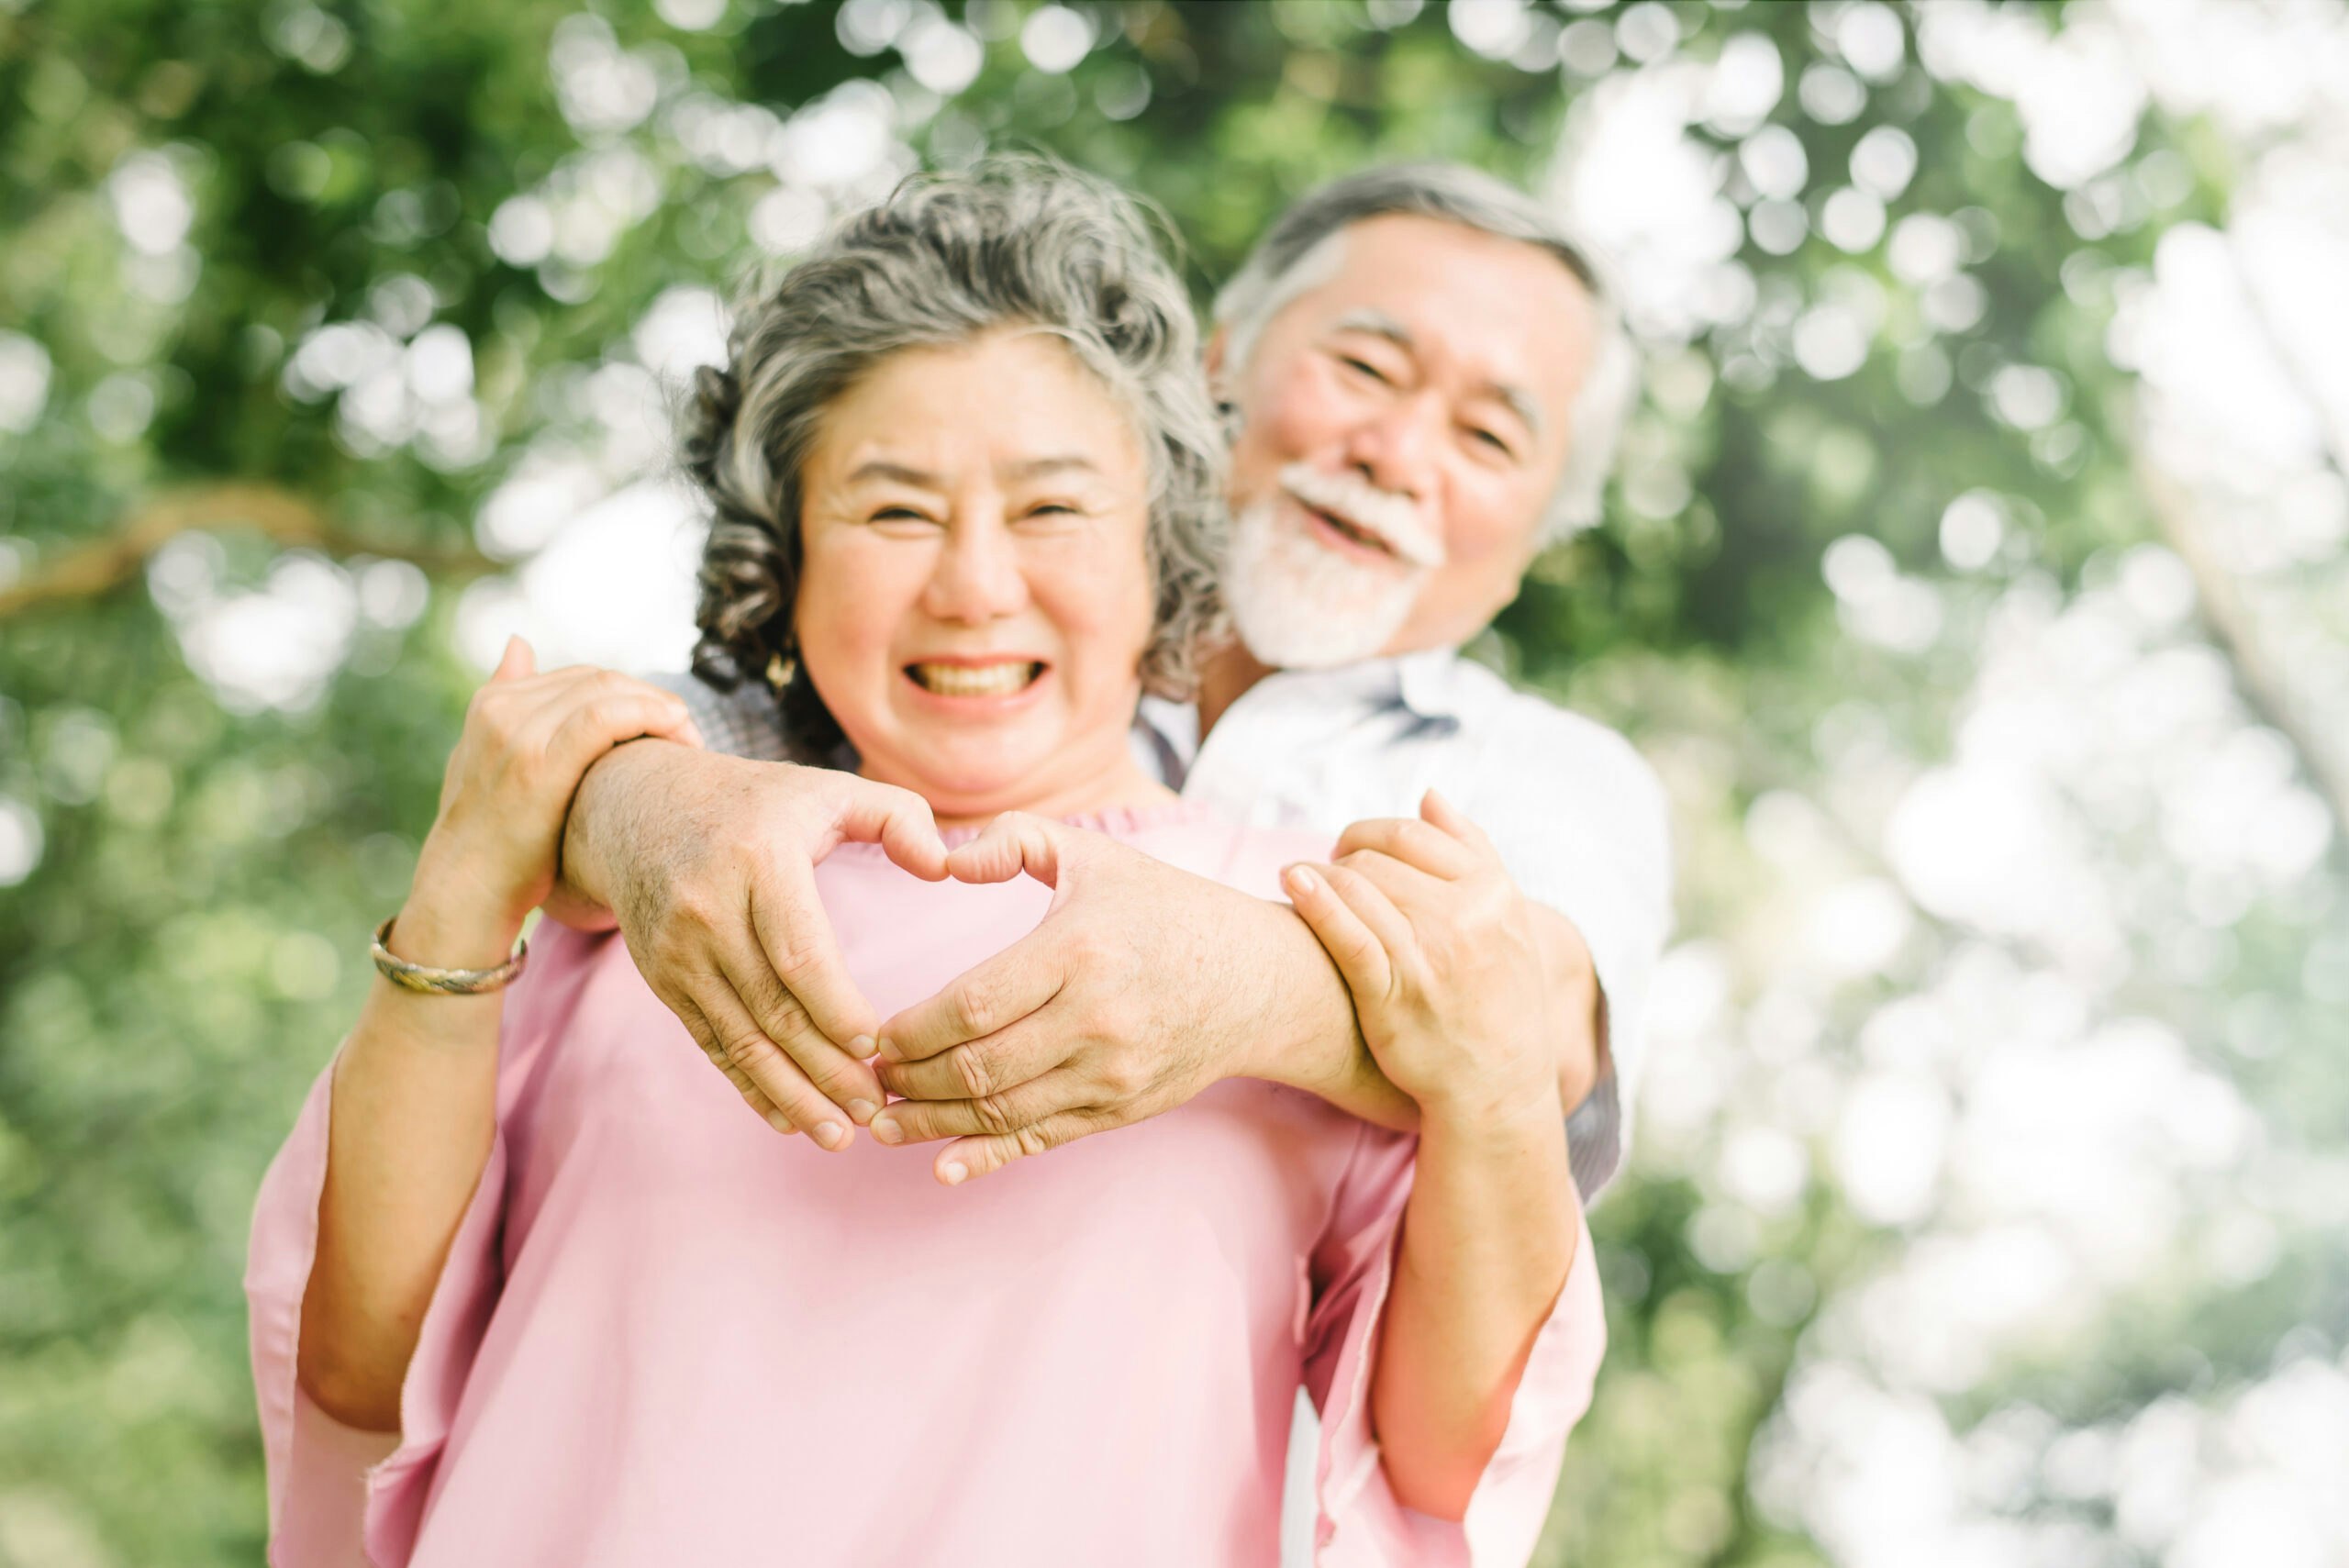 An older couple smiles at the camera. The man stands behind the woman, arms over her shoulders, and makes a heart symbol with his hands.